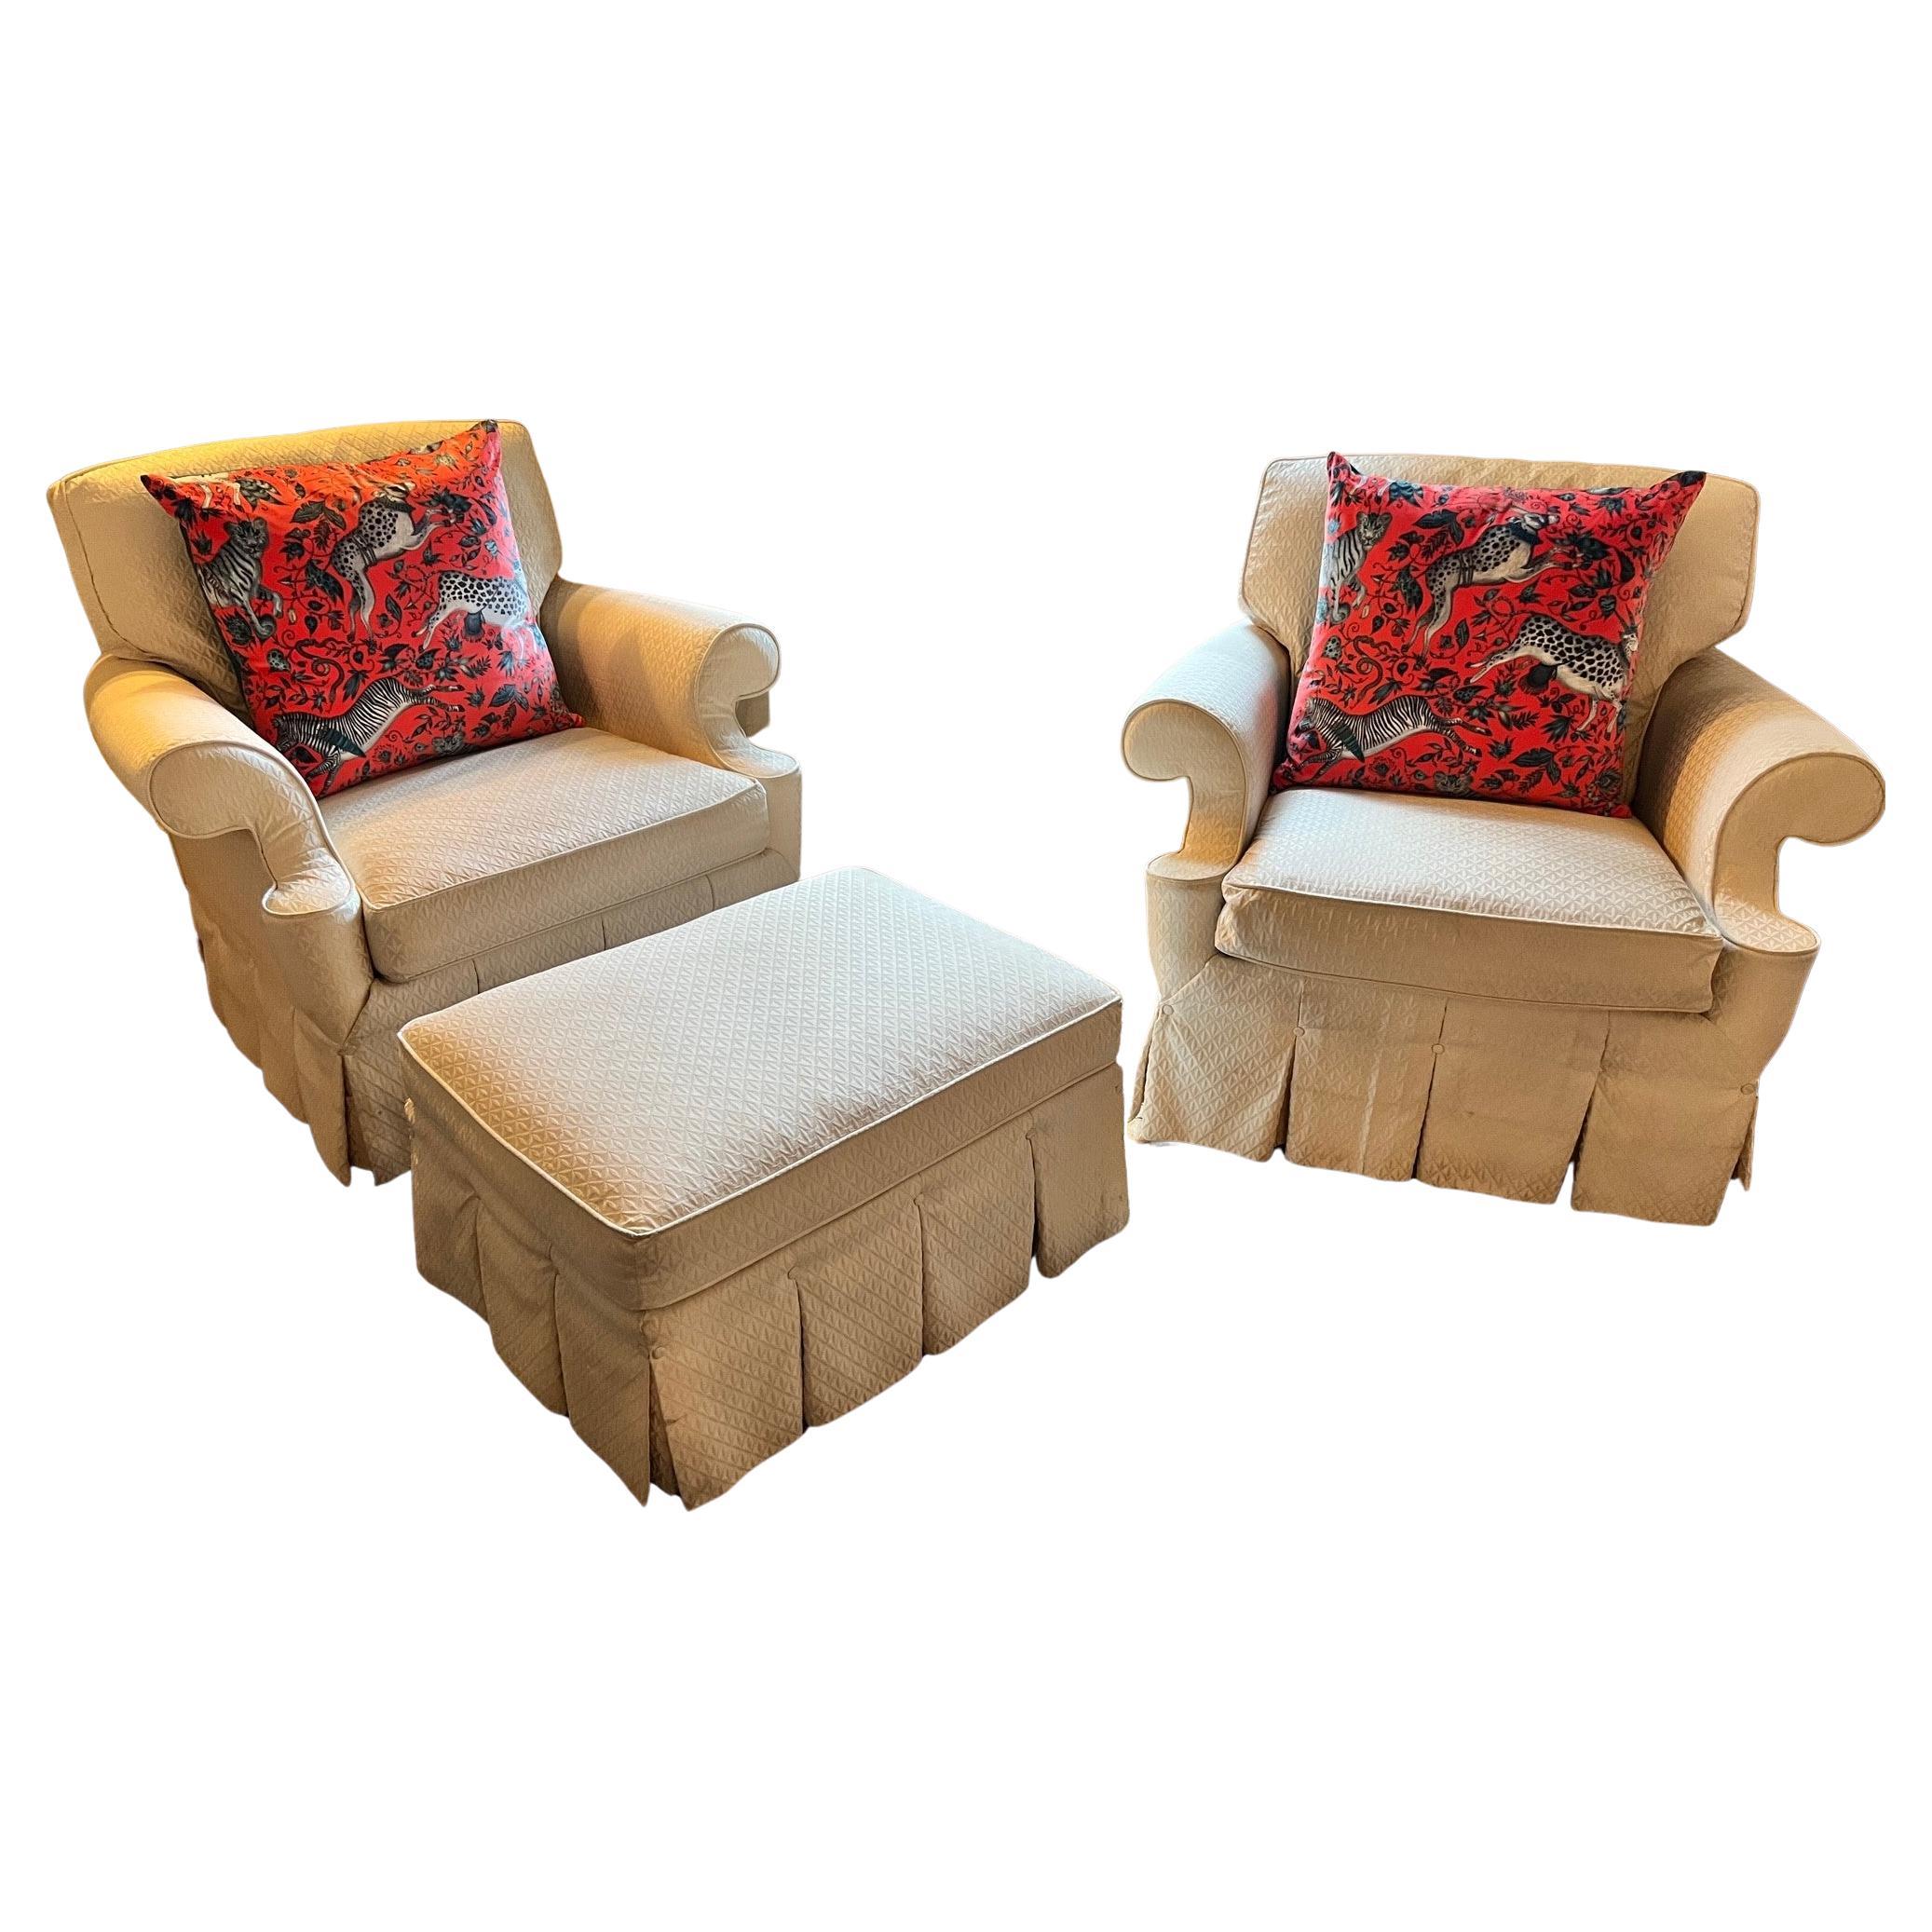 Late 20th C. Hickory chair off white matelassé covered swivel club chairs with a matching ottoman. The set is covered in Sovereign Upholstery by Hickory Chair with a welt trim and kick pleat skirts accented by covered buttons. The chairs have a